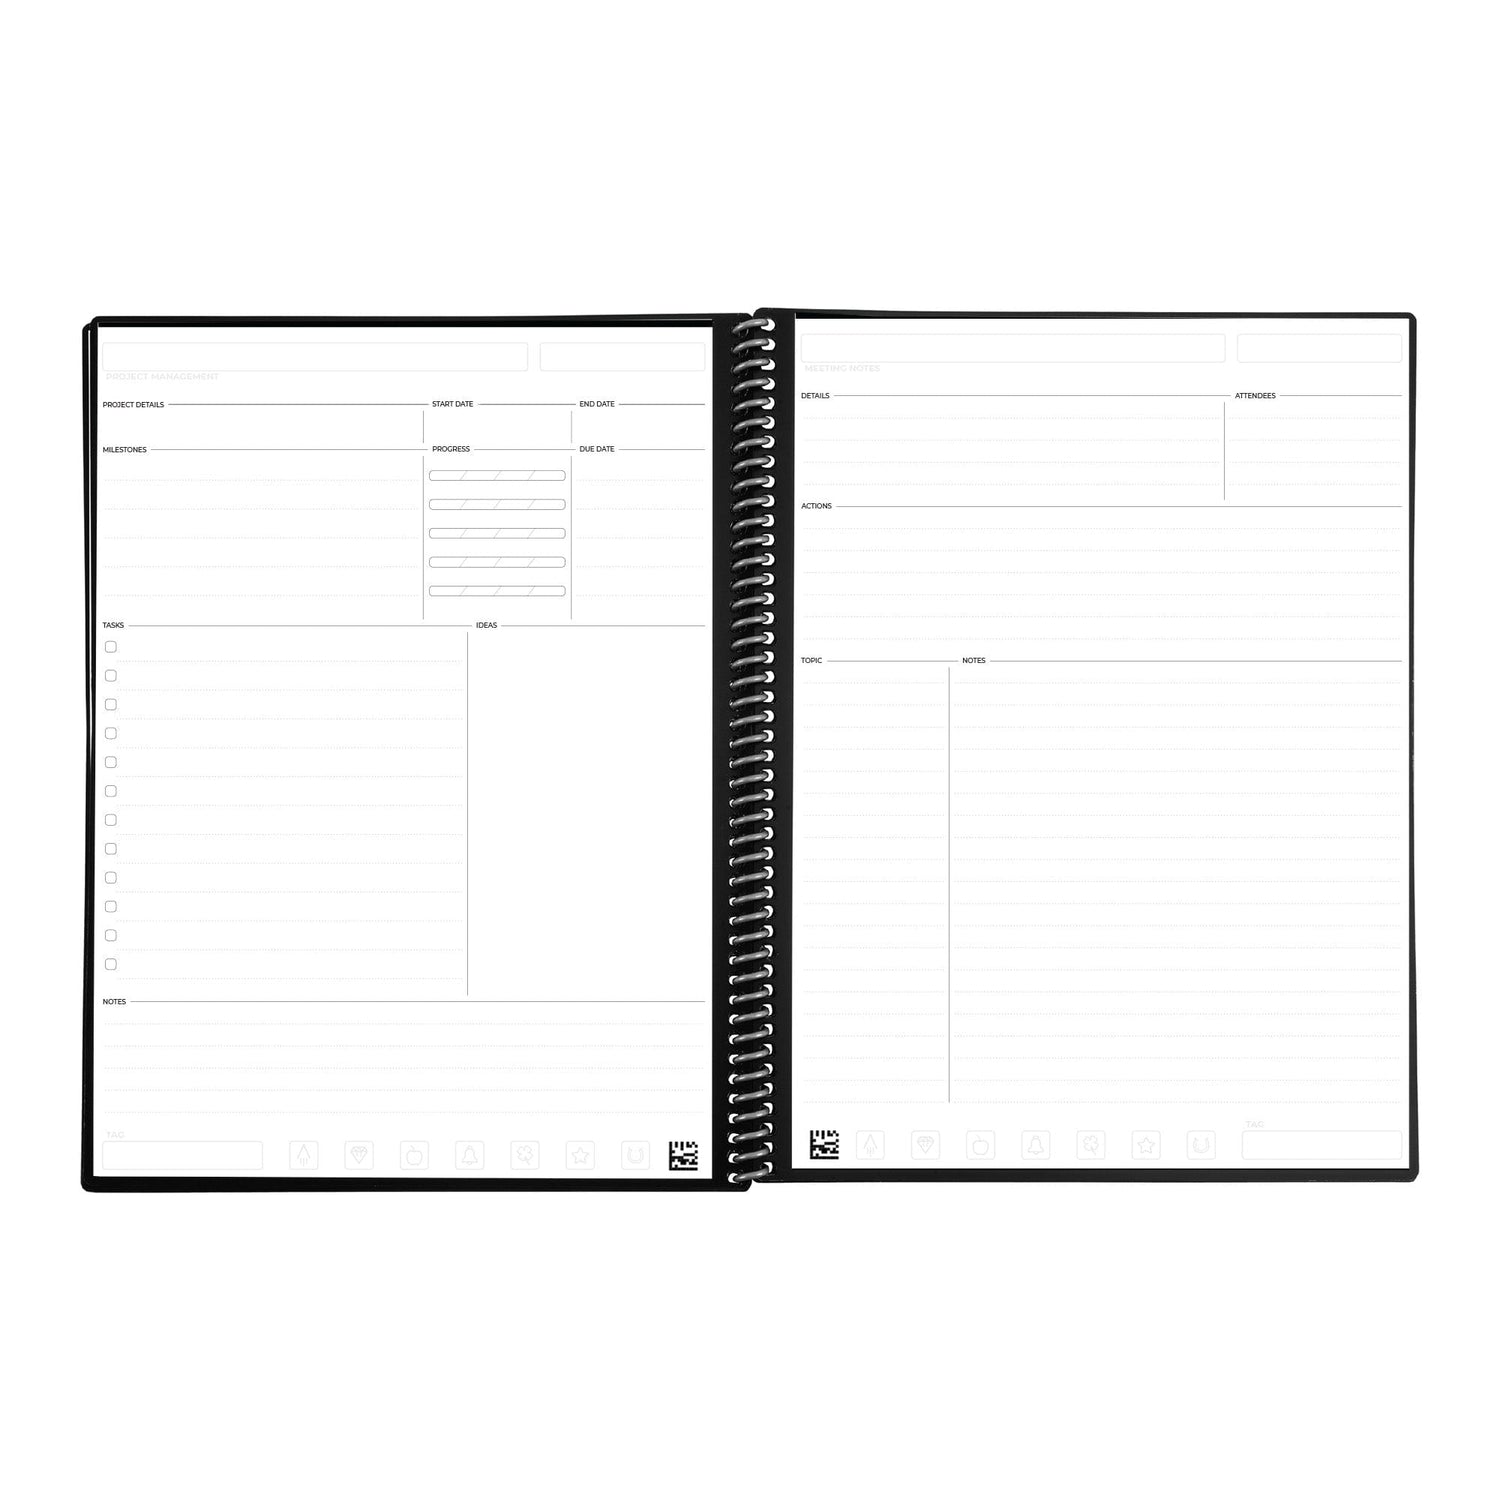  A project management page and a meeting notes page